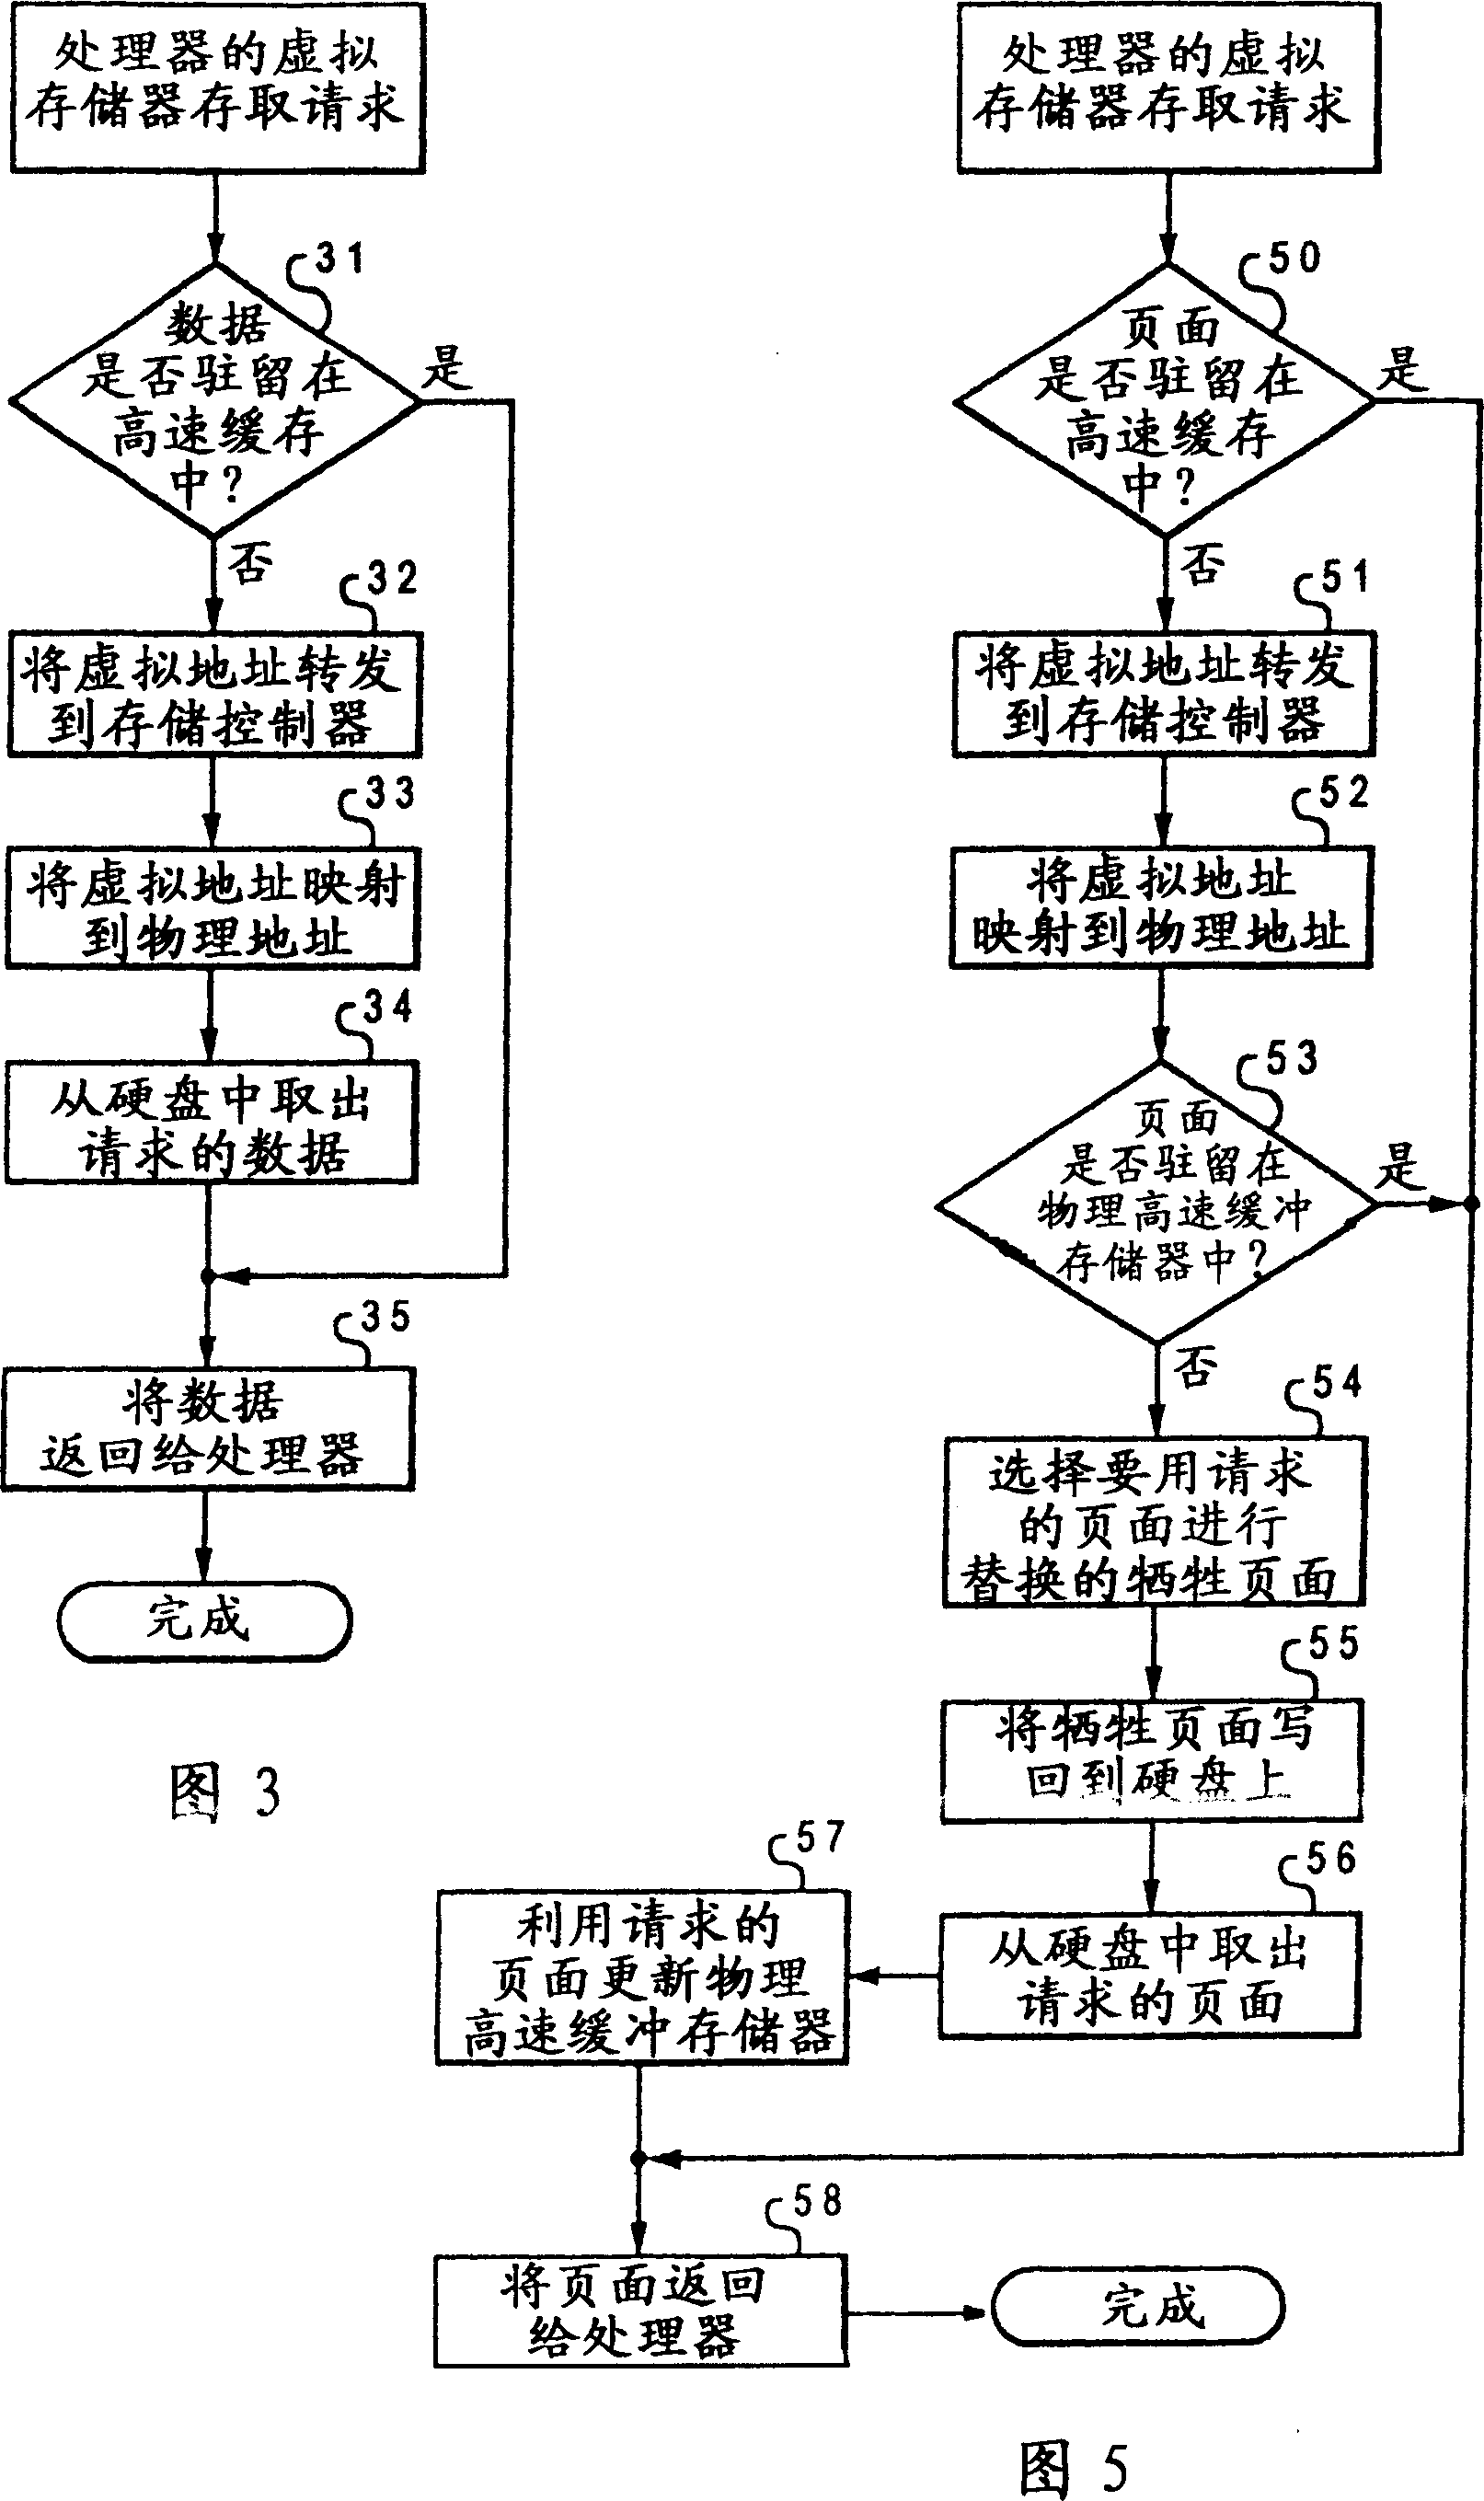 Data processing system capable of using virtual memory processing mode